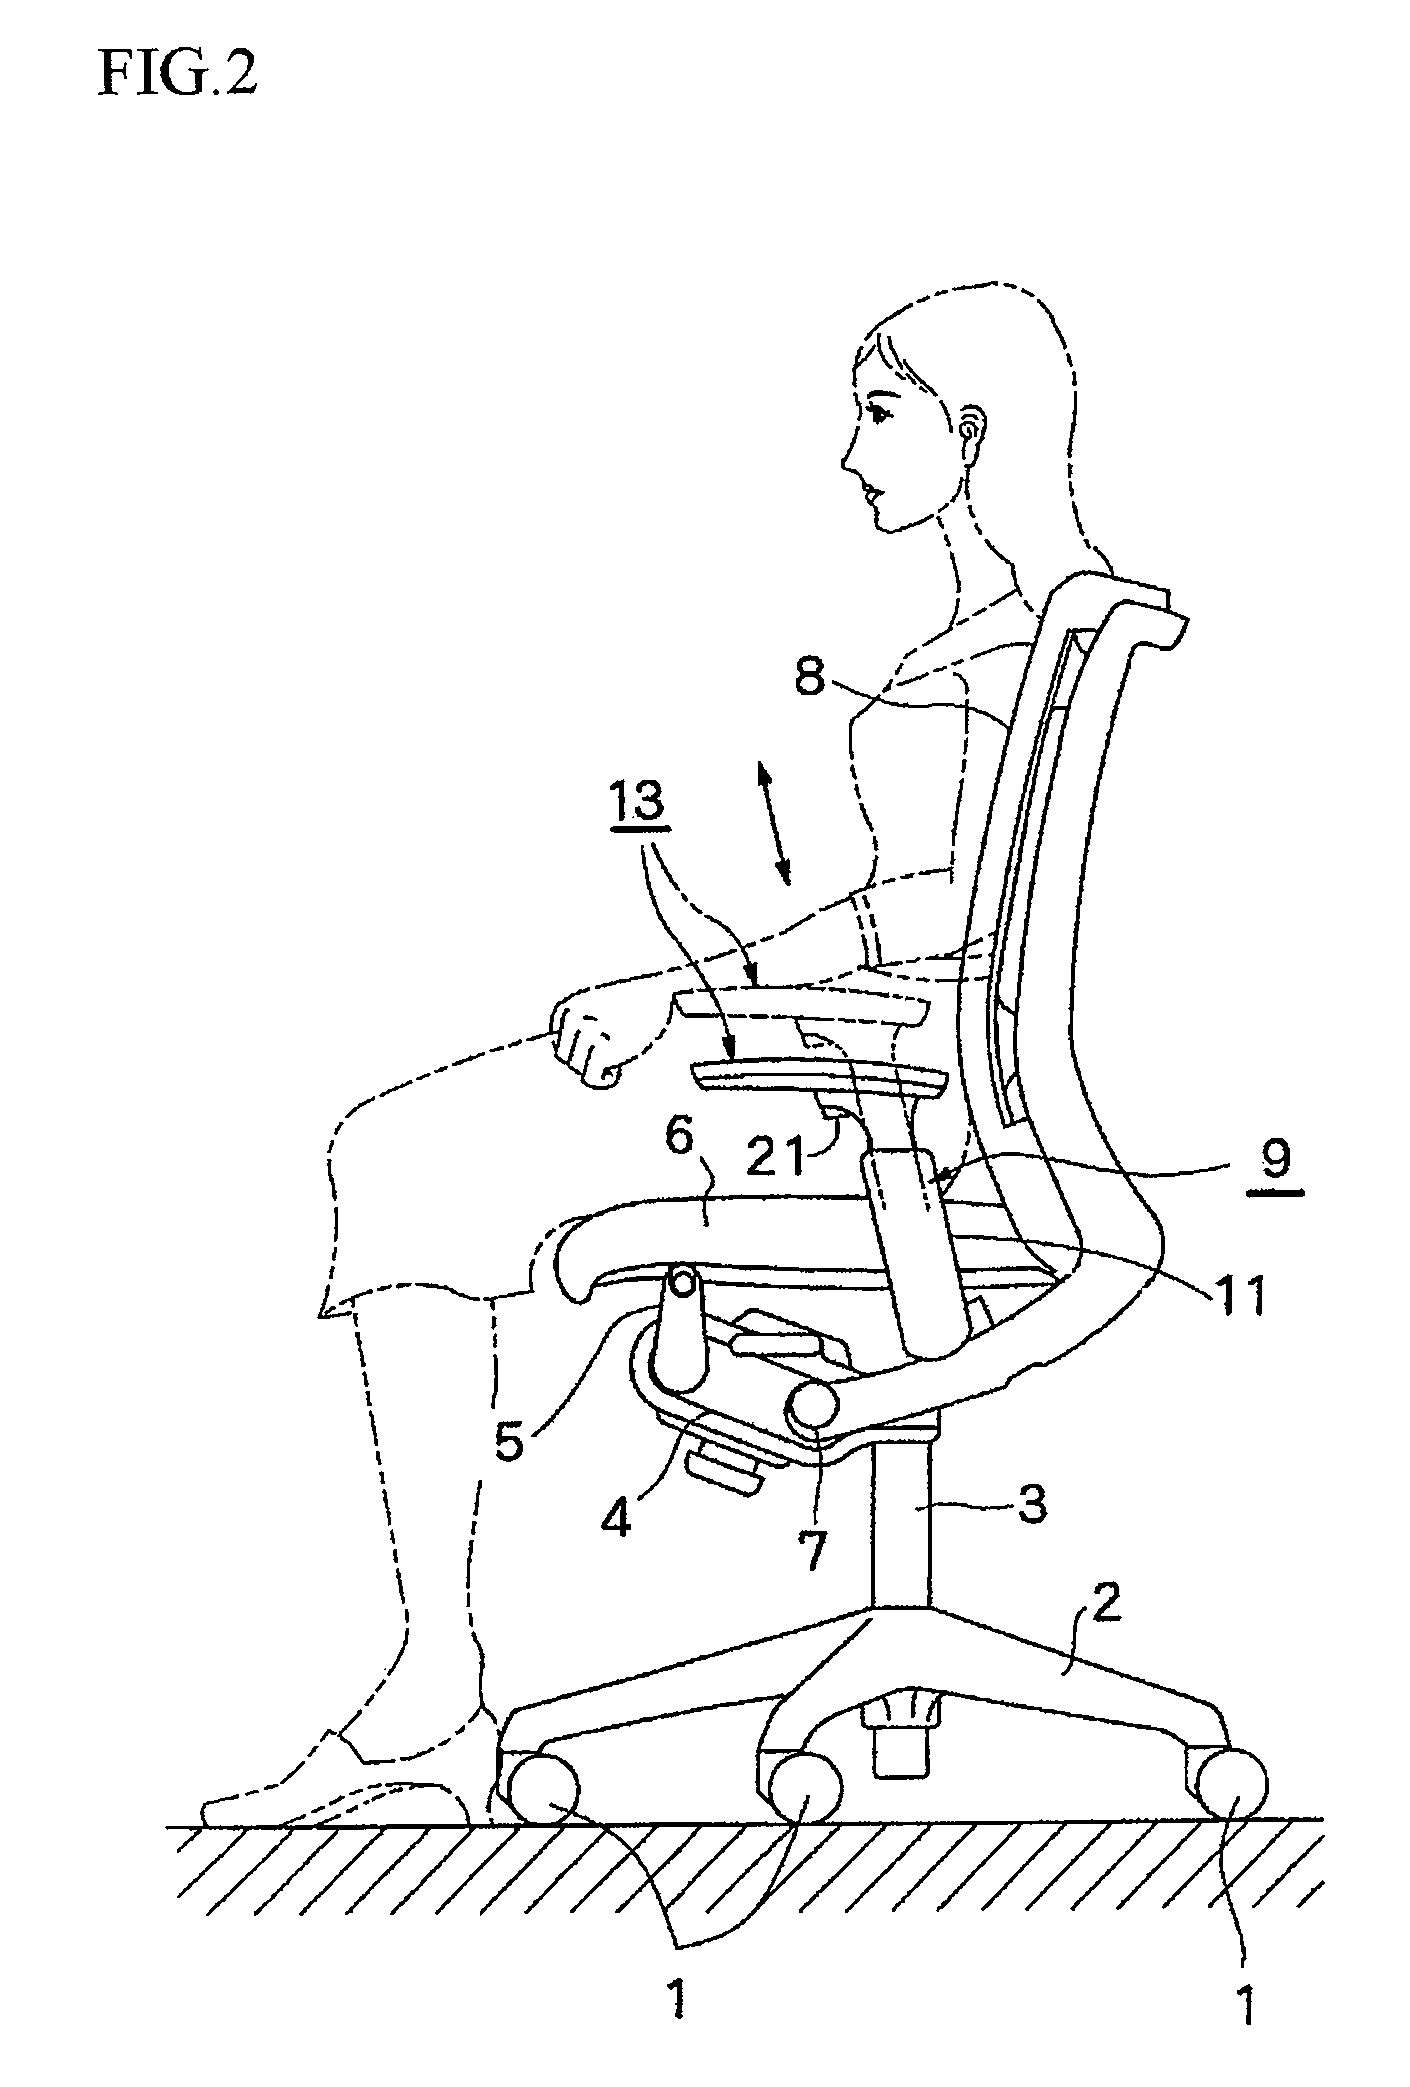 Armrest device in a chair